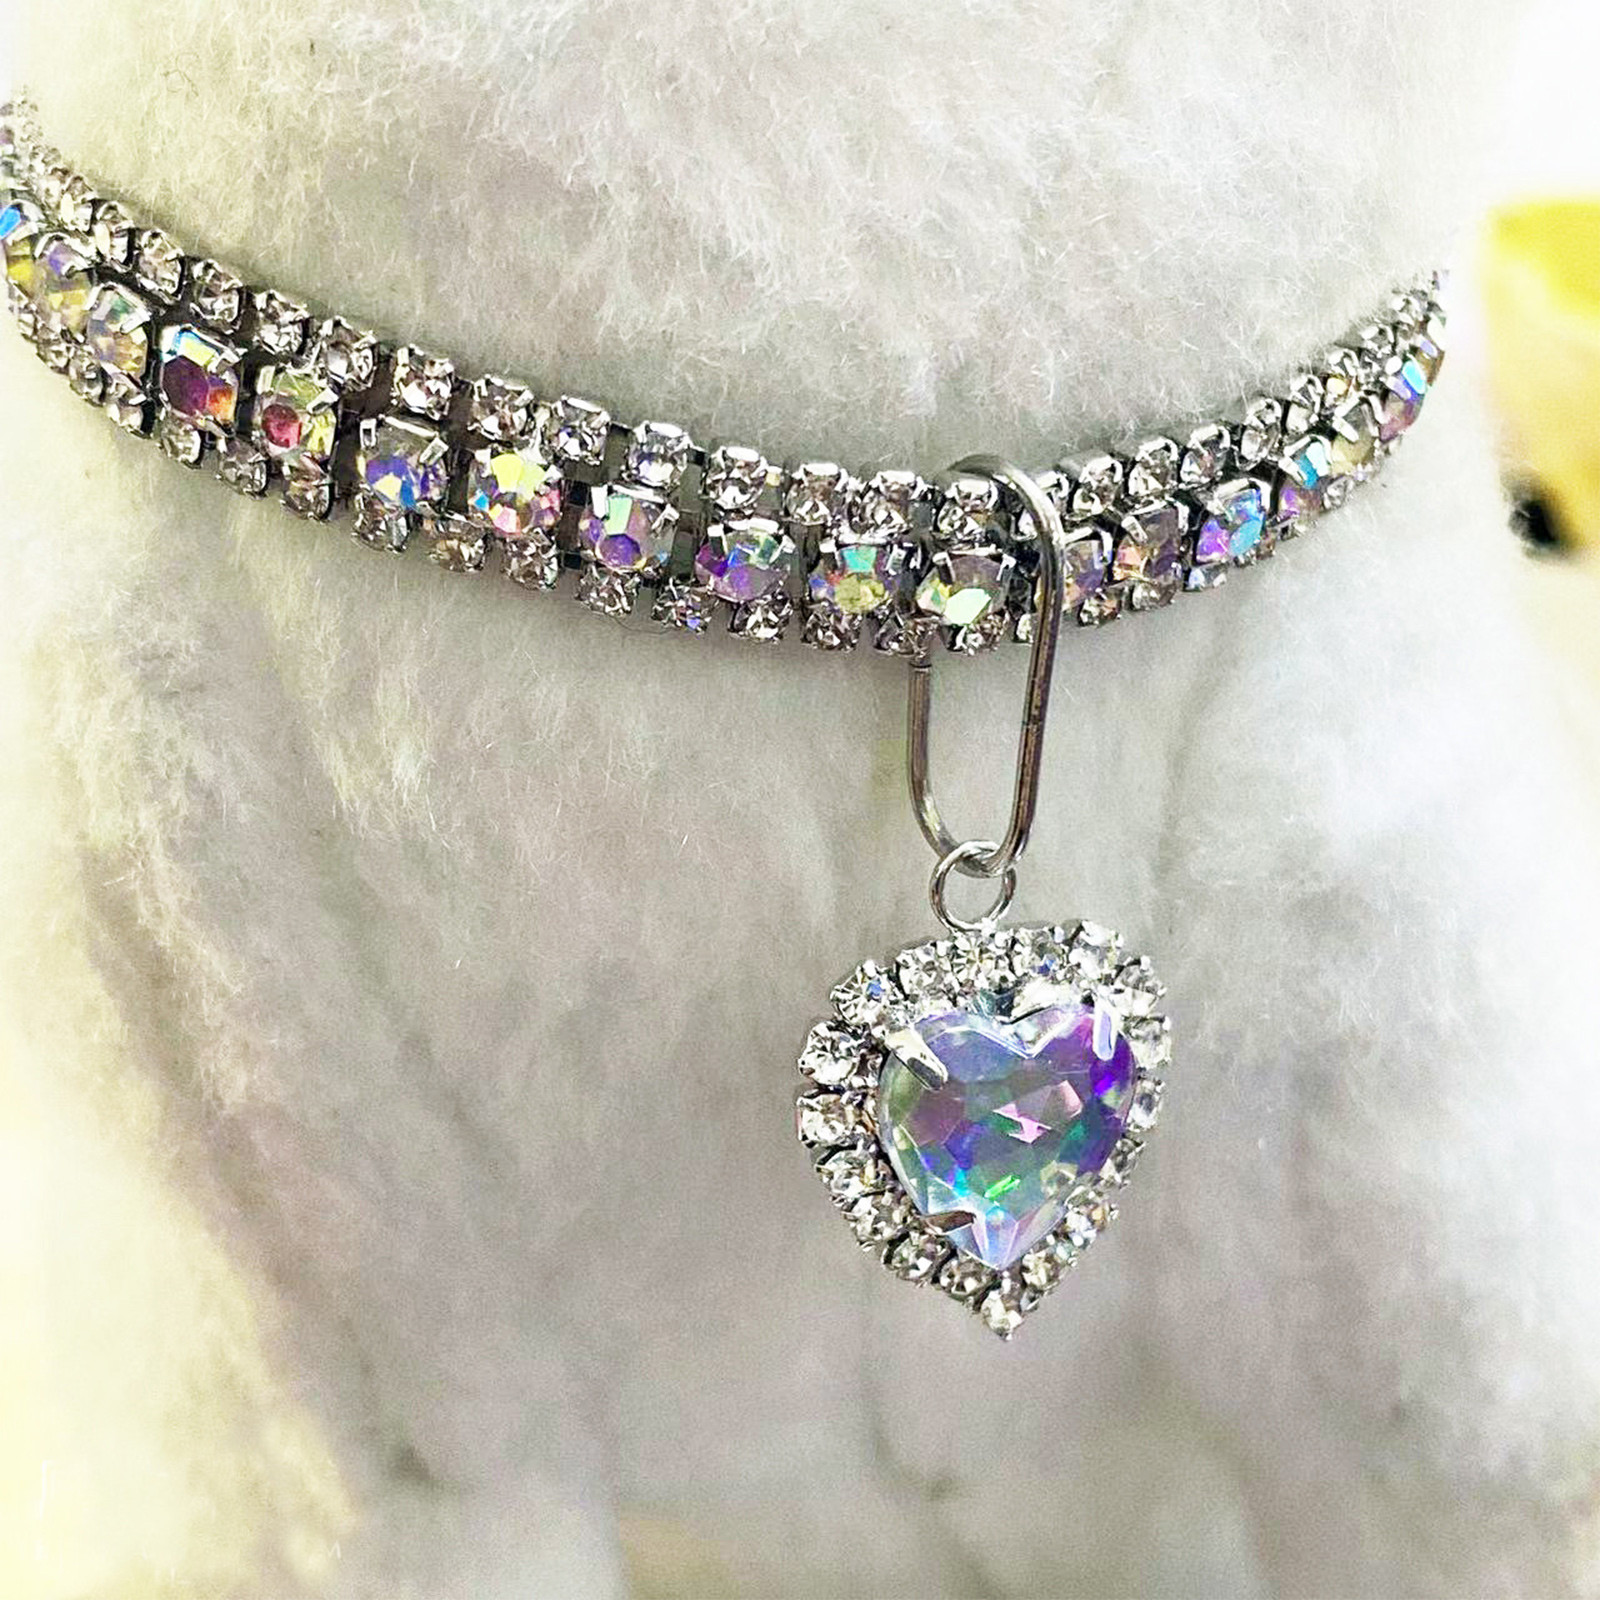 amousa Love Water Drop Rhinestone Cat Necklace Pet Dog Necklace Jewelry Necklace Cat Necklace - image 4 of 4